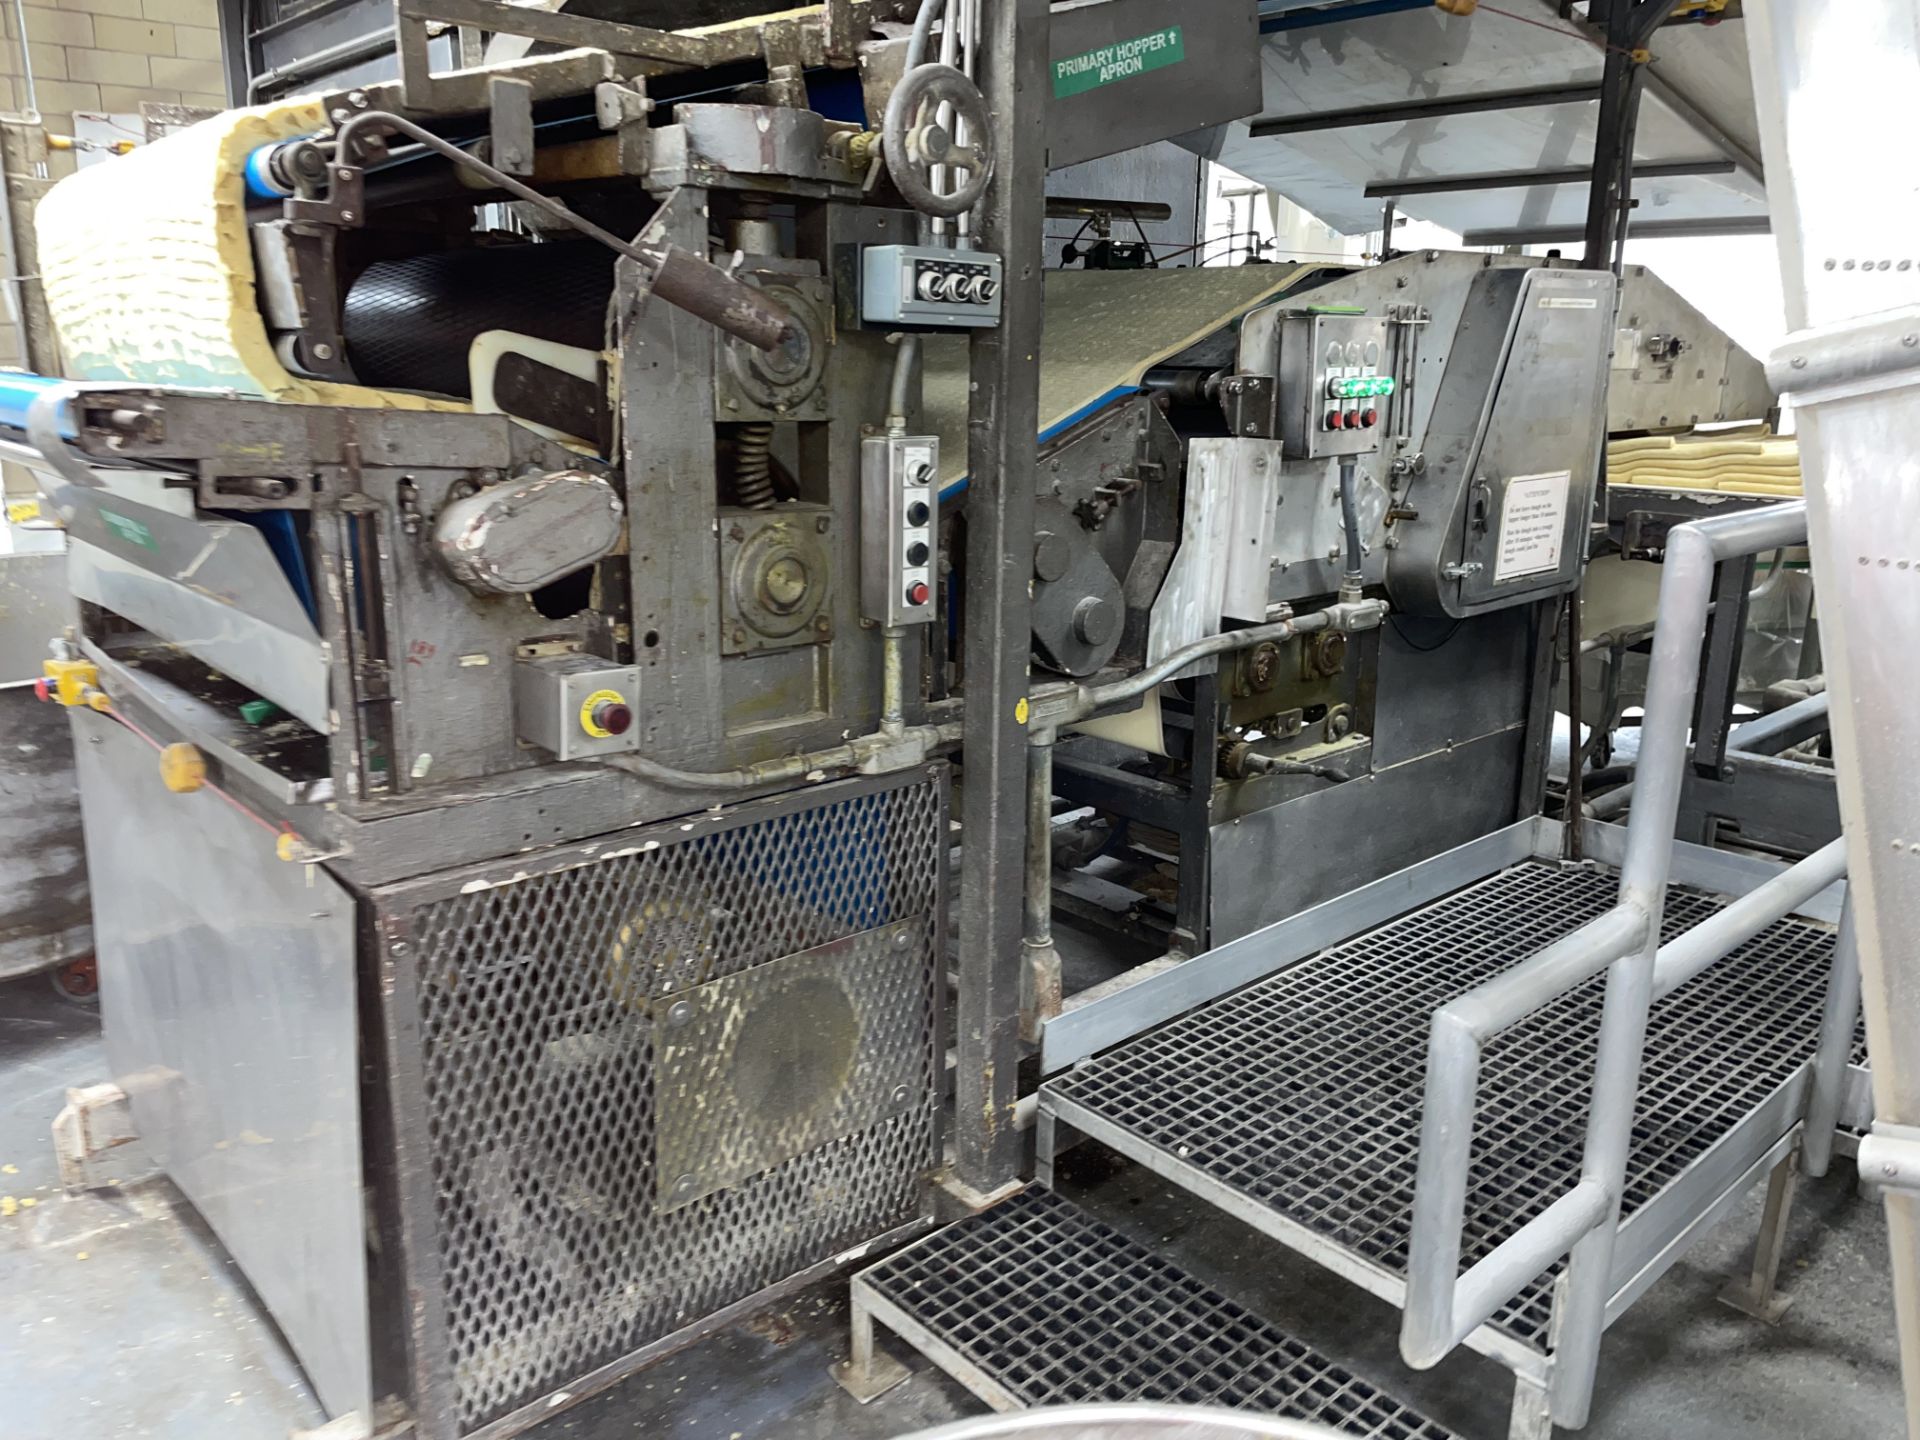 T L Green Lapping Conveyor System S/N 79-702, Loading Fee: $5000 - Late Delivery April 2022